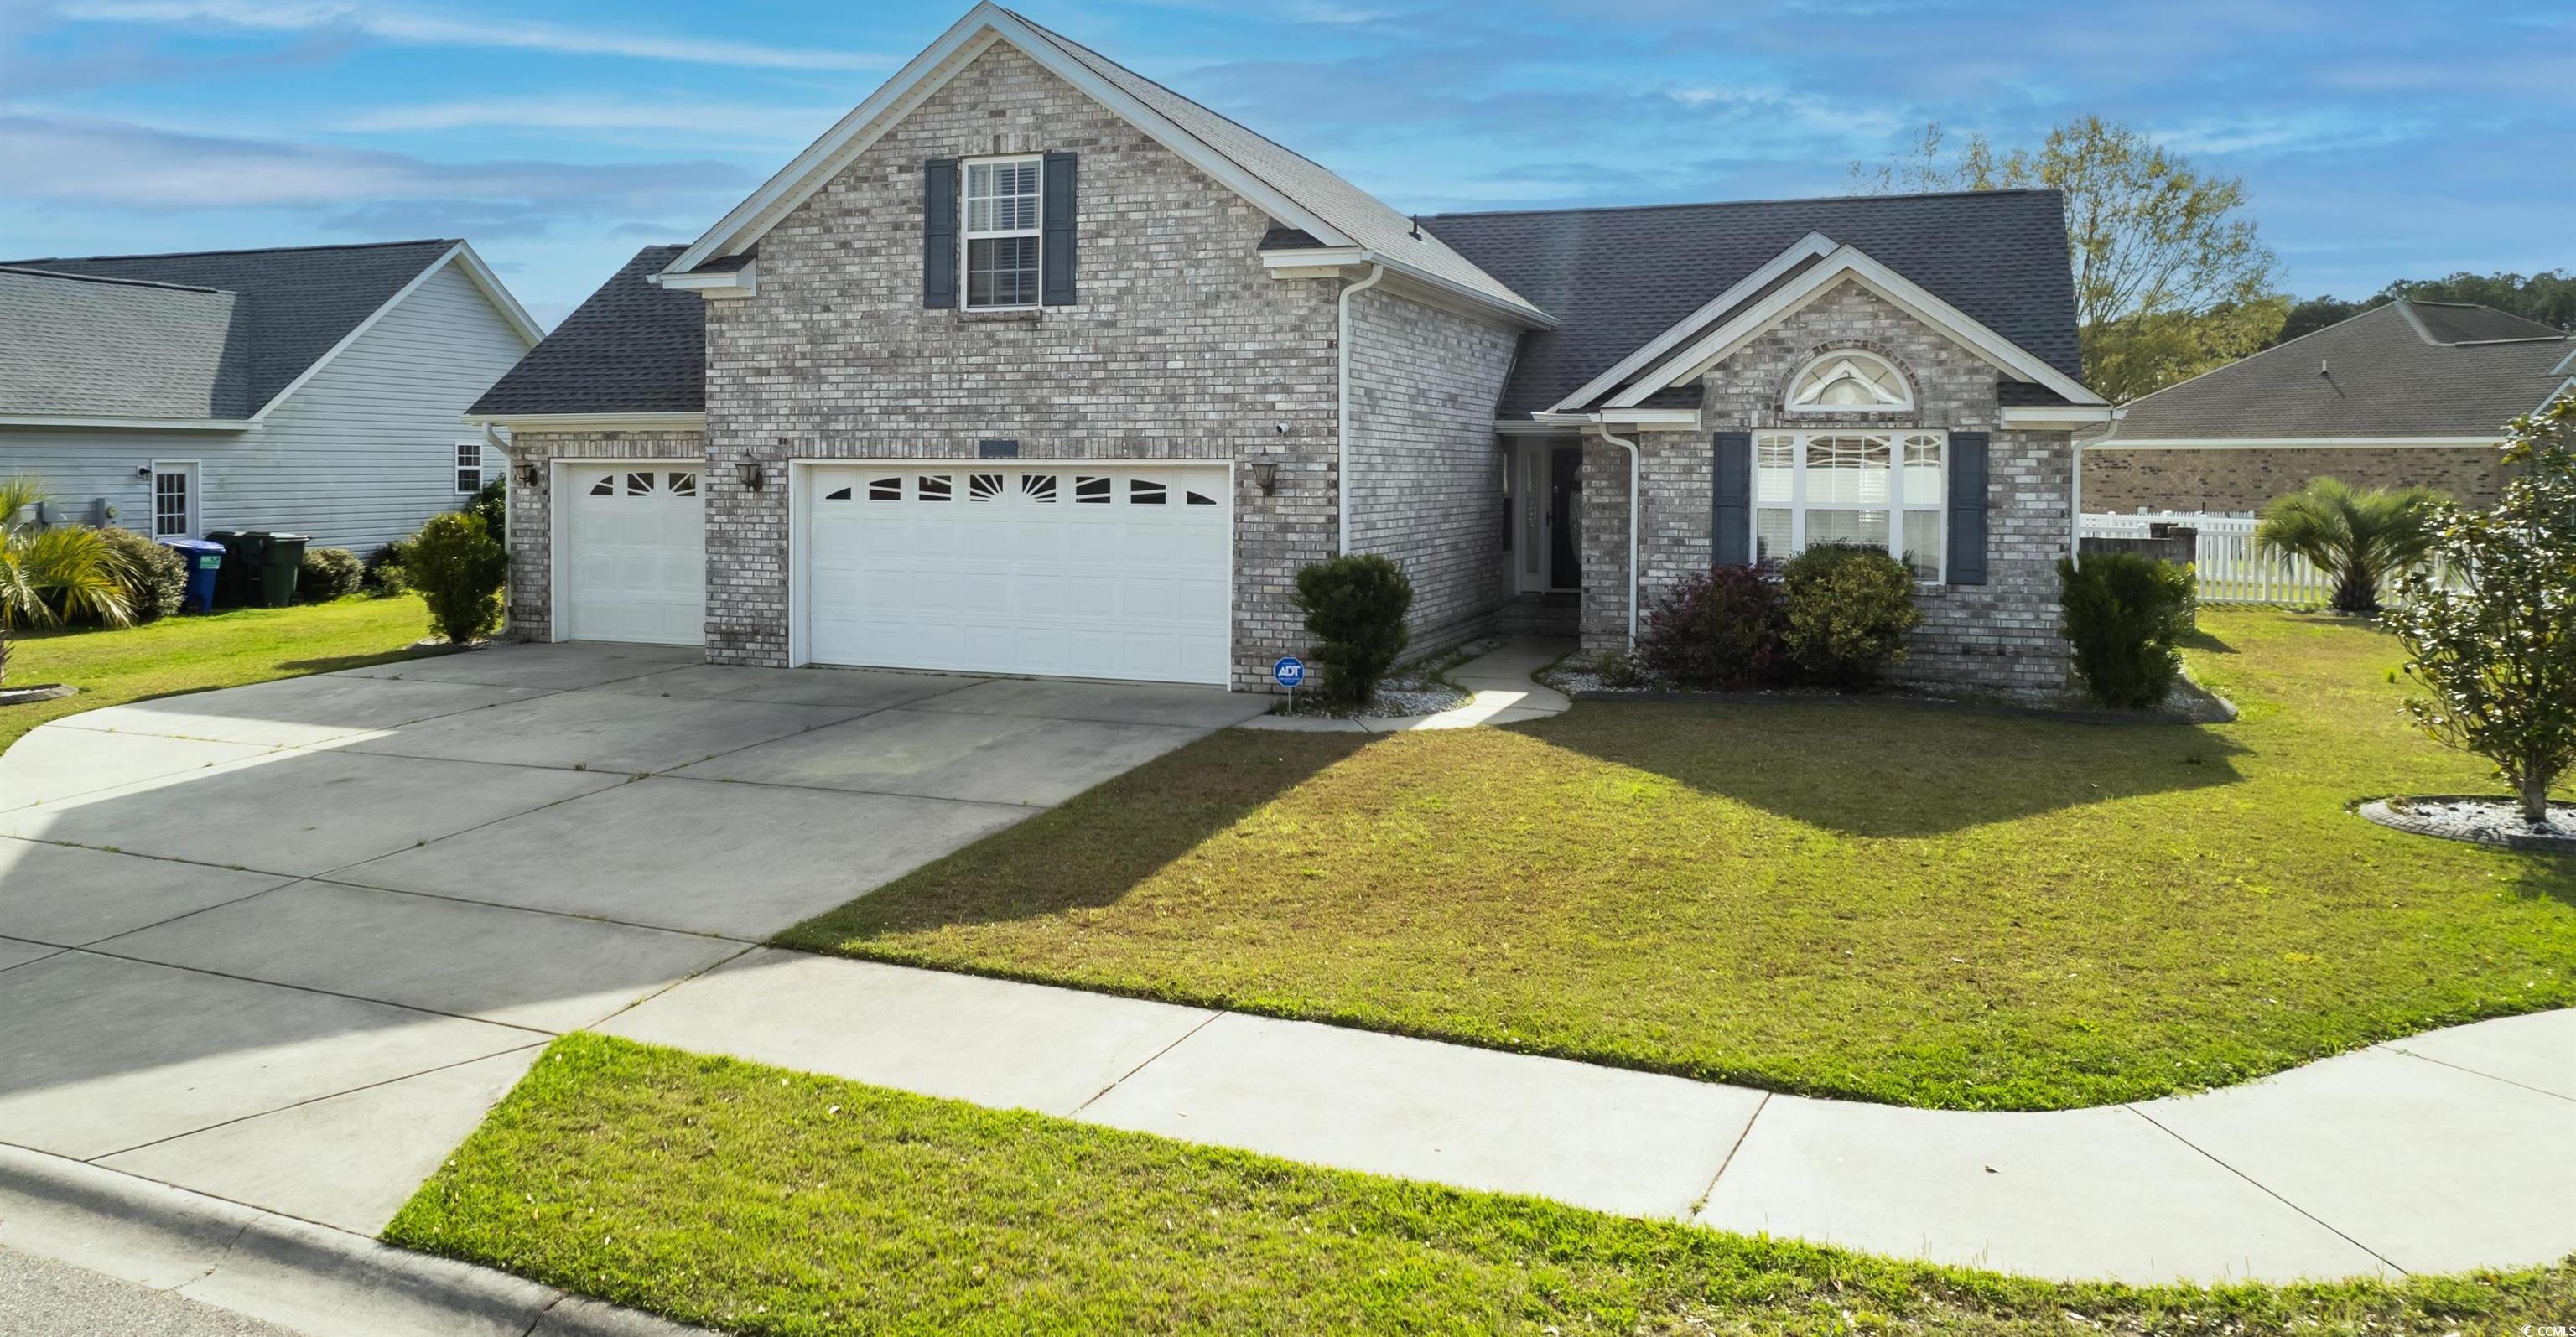 Photo one of 1300 Tiger Grand Dr. Conway SC 29526 | MLS 2407048